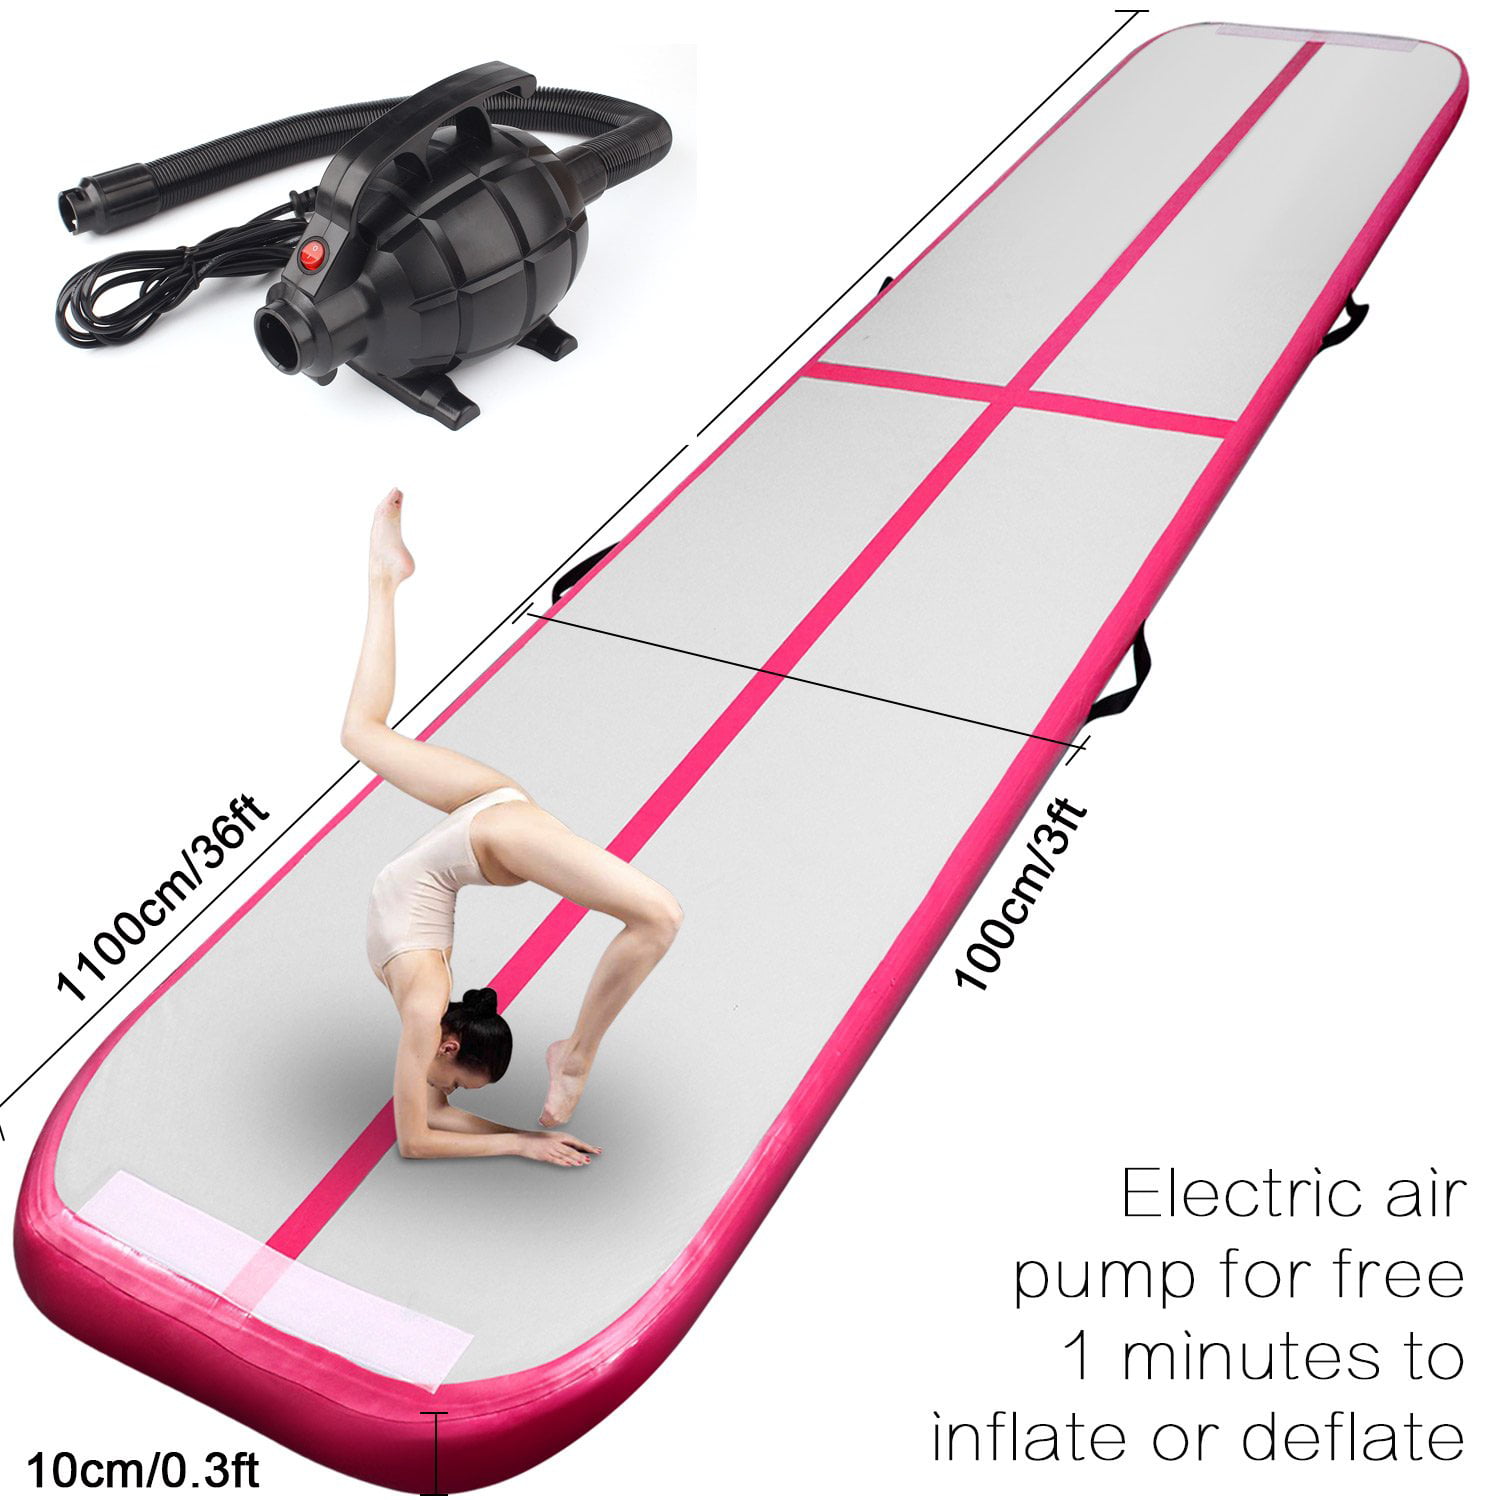 Tumbling,Parkour Home Floor and Martial Arts FBSPORT 9.84ft/13.12ft/16.4ft/19.68ft air Track Tumbling mat Inflatable Gymnastics airtrack with Electric Air Pump for Practice Gymnastics 